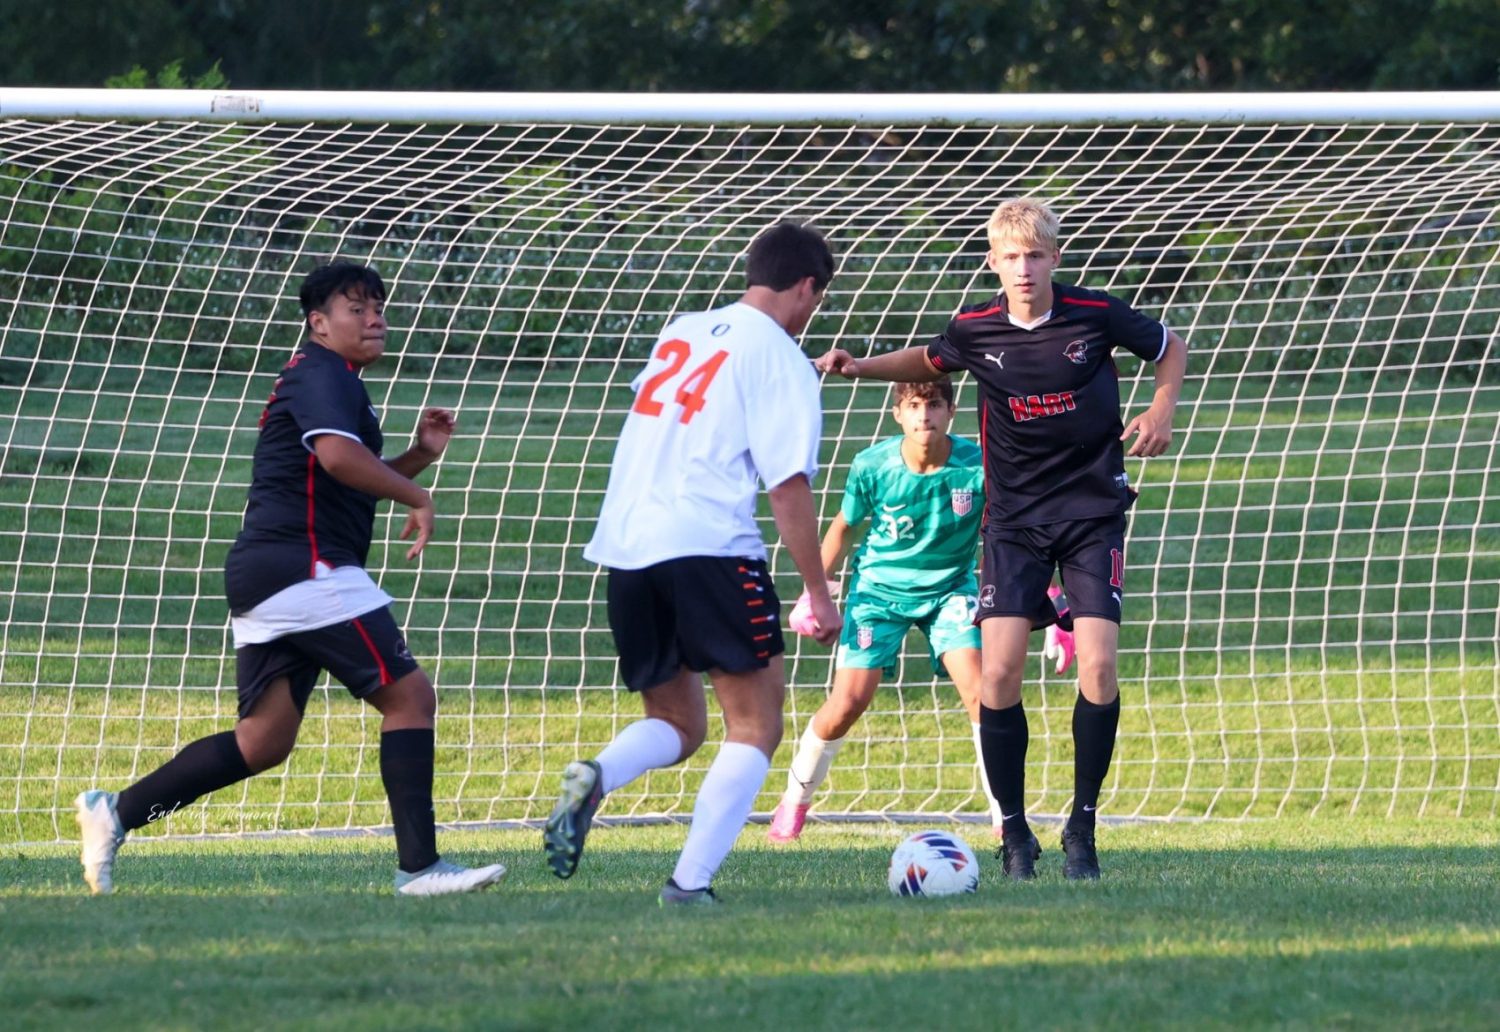 Ludington breezes by Hart in 5-0 soccer victory